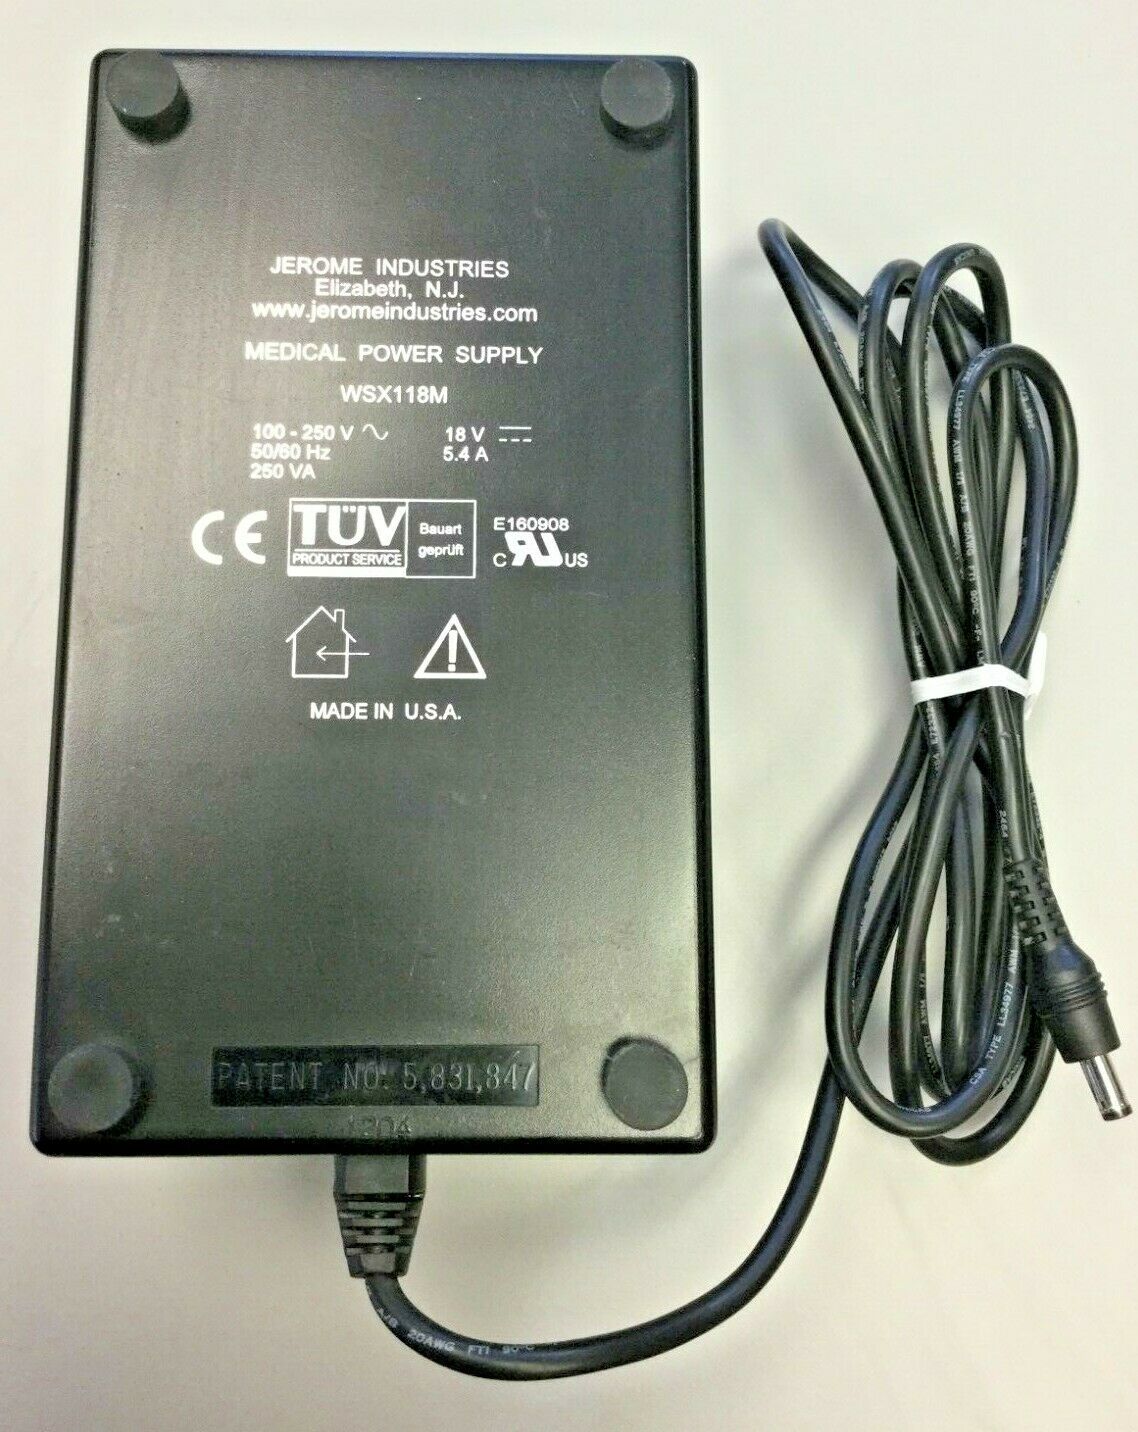 New Jerome Industries WSX118M 18VDC 5.4A Medical Power Supply for Laptop